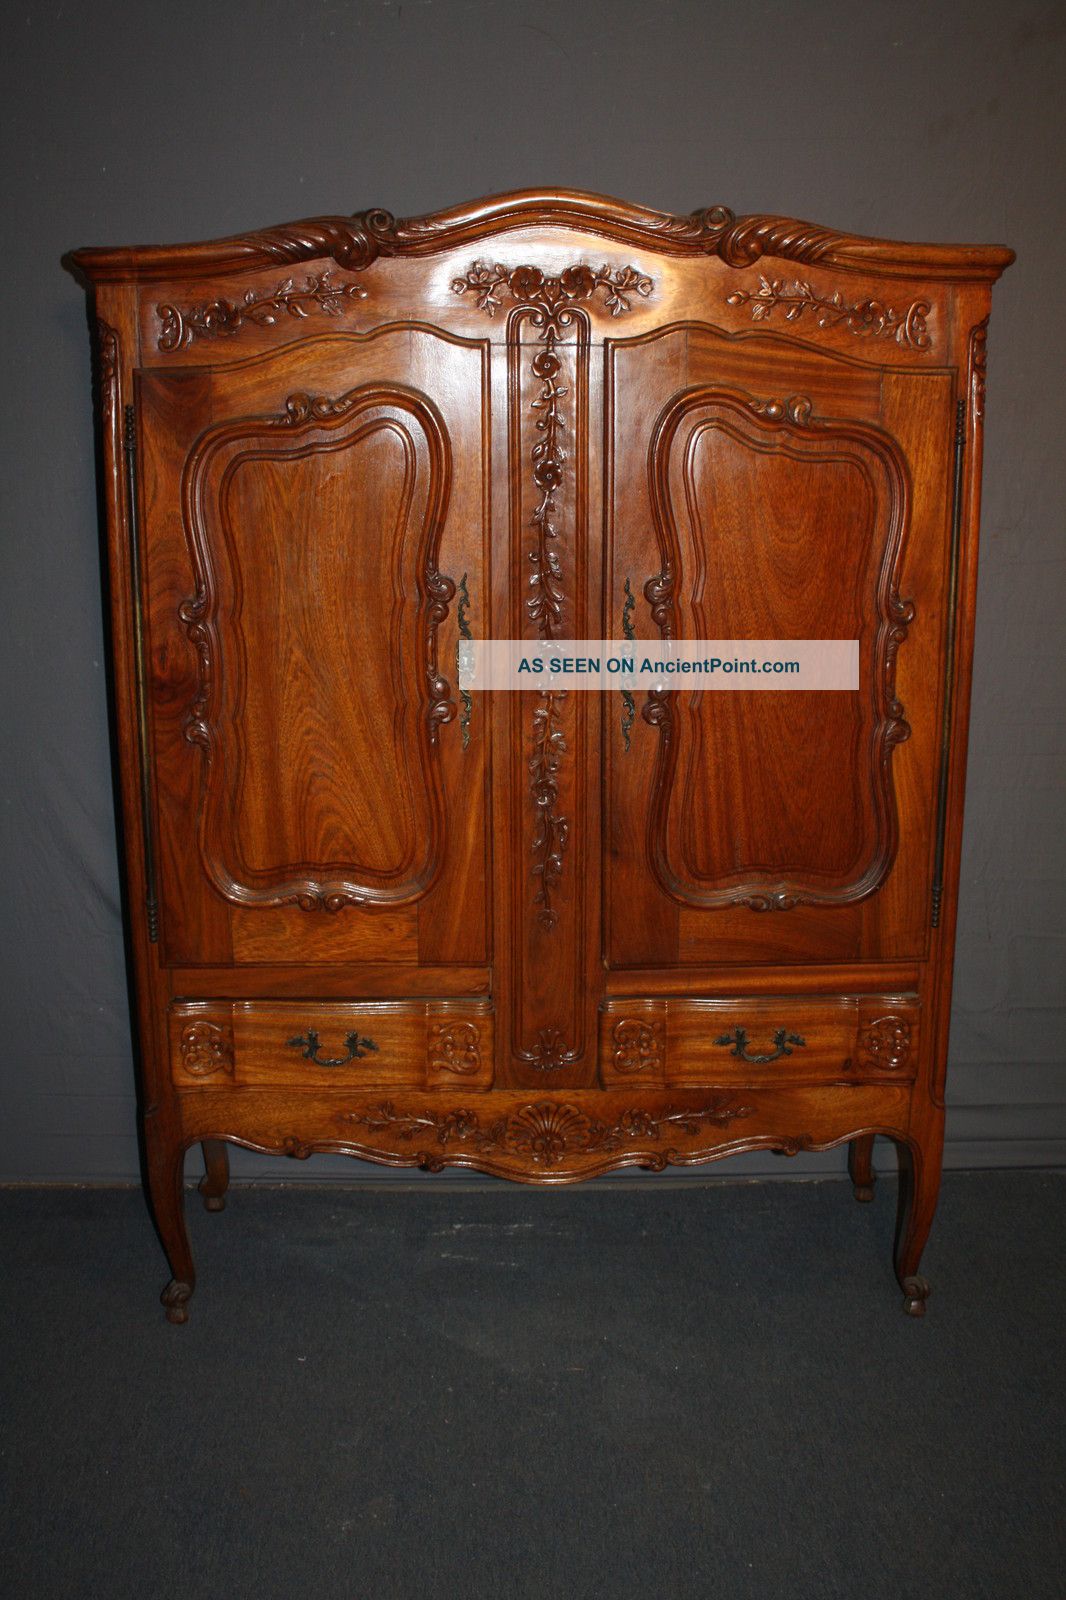 Antique Or Vintage Carved Armoire Ornate French Style Carving 1900-1950 photo